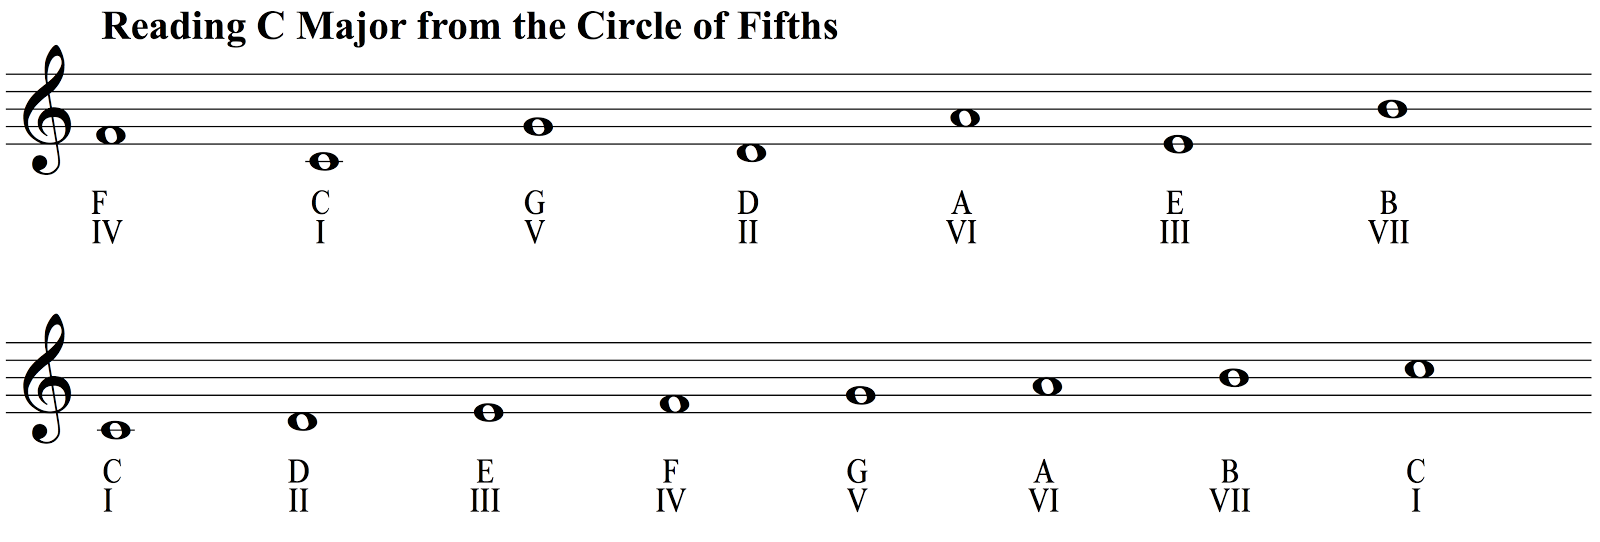 Reading C Major Directly From the Circle of Fifths